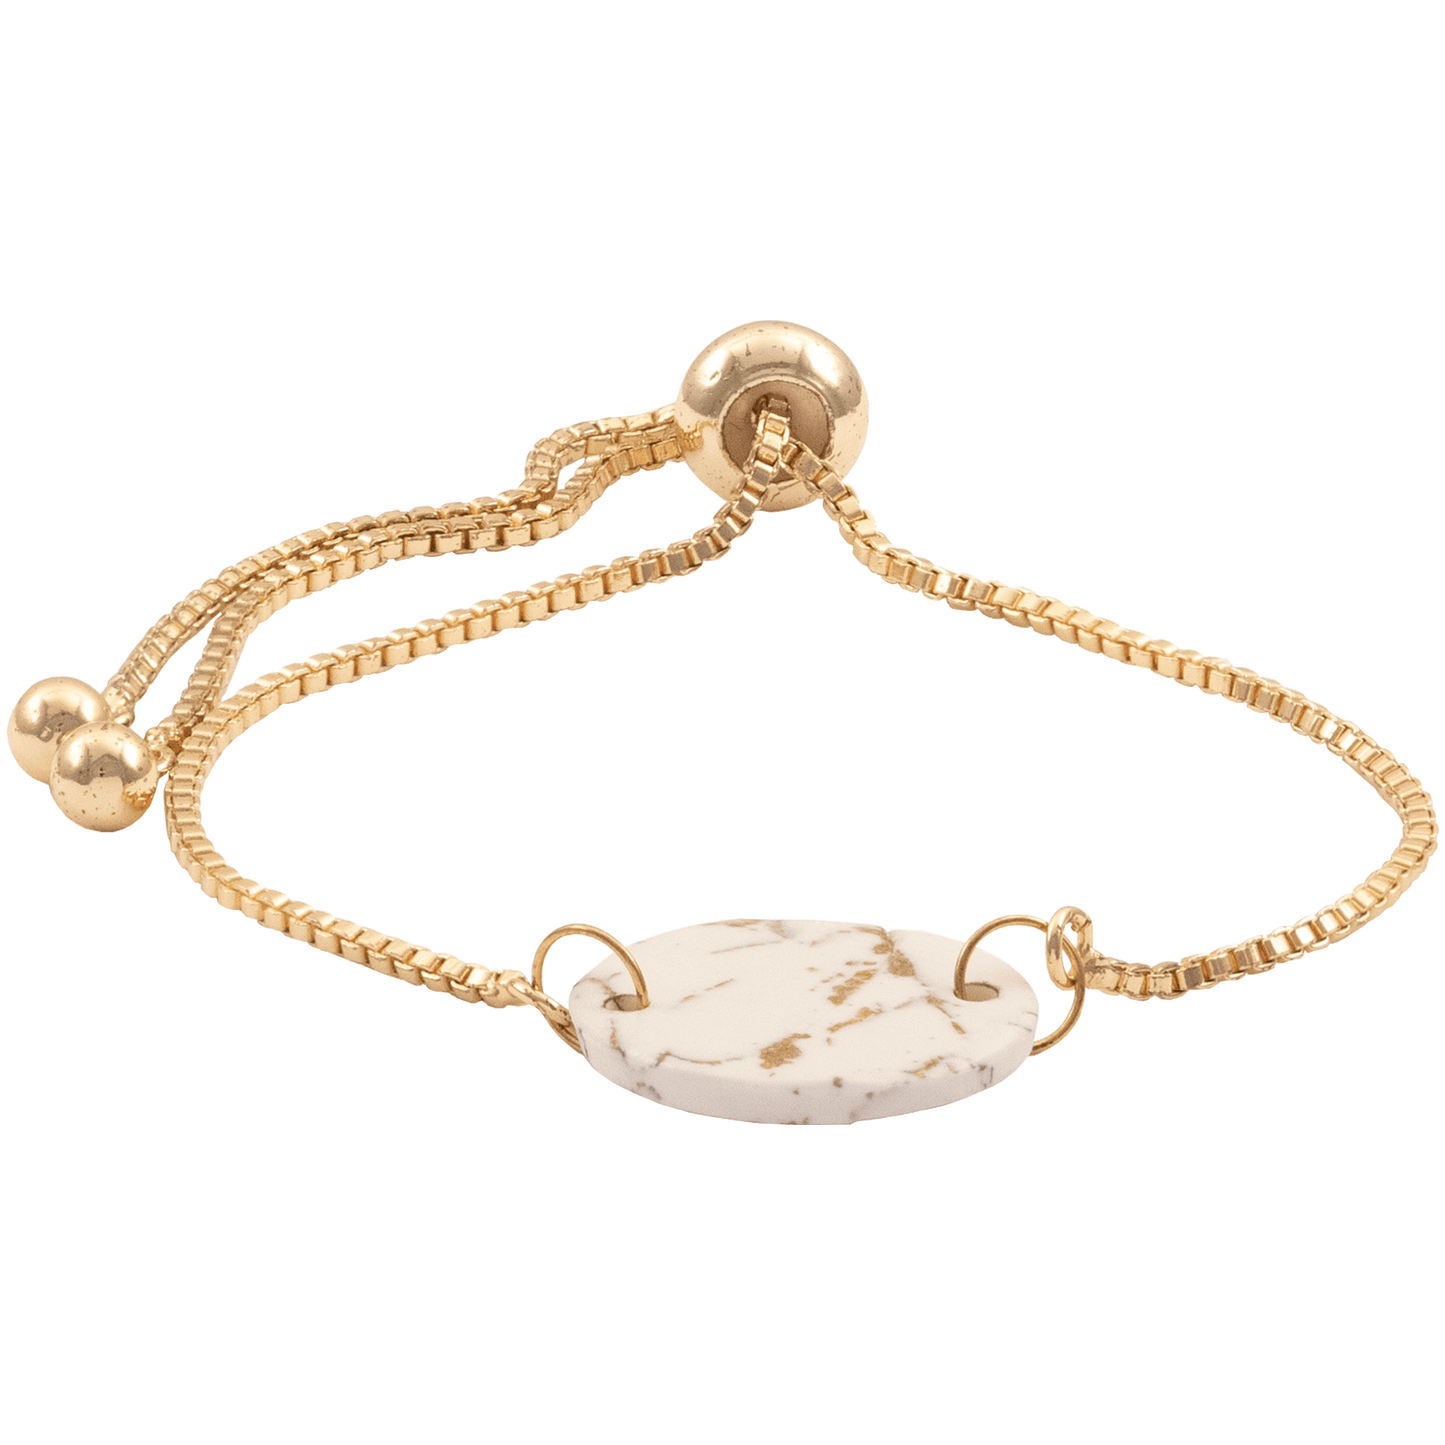 Dainty Adjustable Gold-Plated Bracelet with white grey and gold marbled disc.